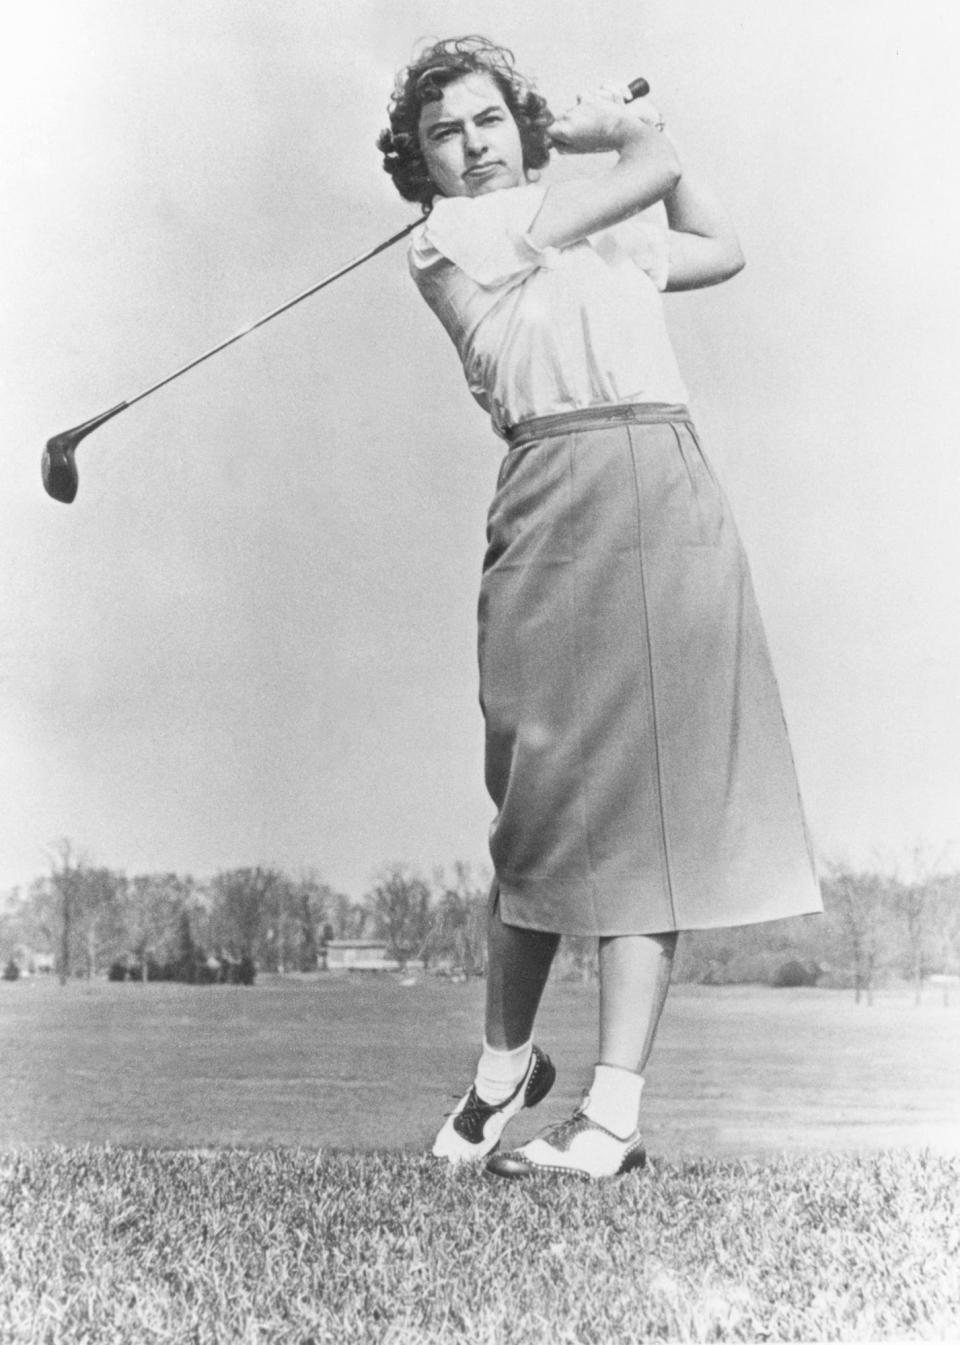 "Betsy Rawls was an extraordinary person who led an extraordinary life," Texas women's golf coach Ryan Murphy said. "Her record was Hall of Fame worthy and her legacy is one that helped shape women's golf as we know it today." Rawls died last weekend at age 95.